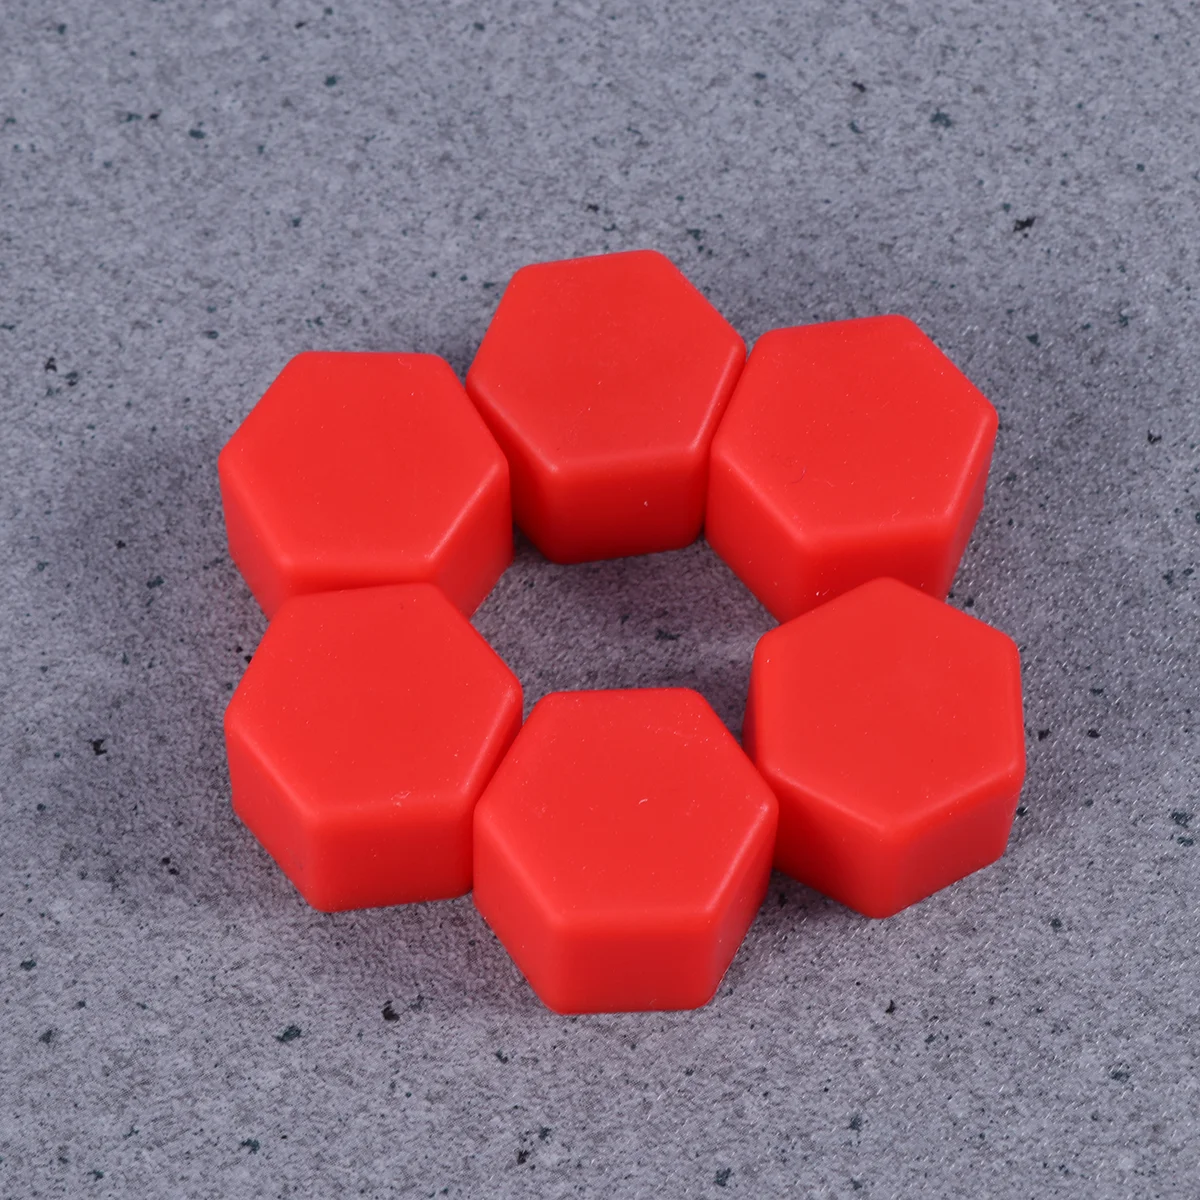 

20pcs Wheel Lug Nut Covers Bolts Covers Screw Protect Caps 21mm (Red)